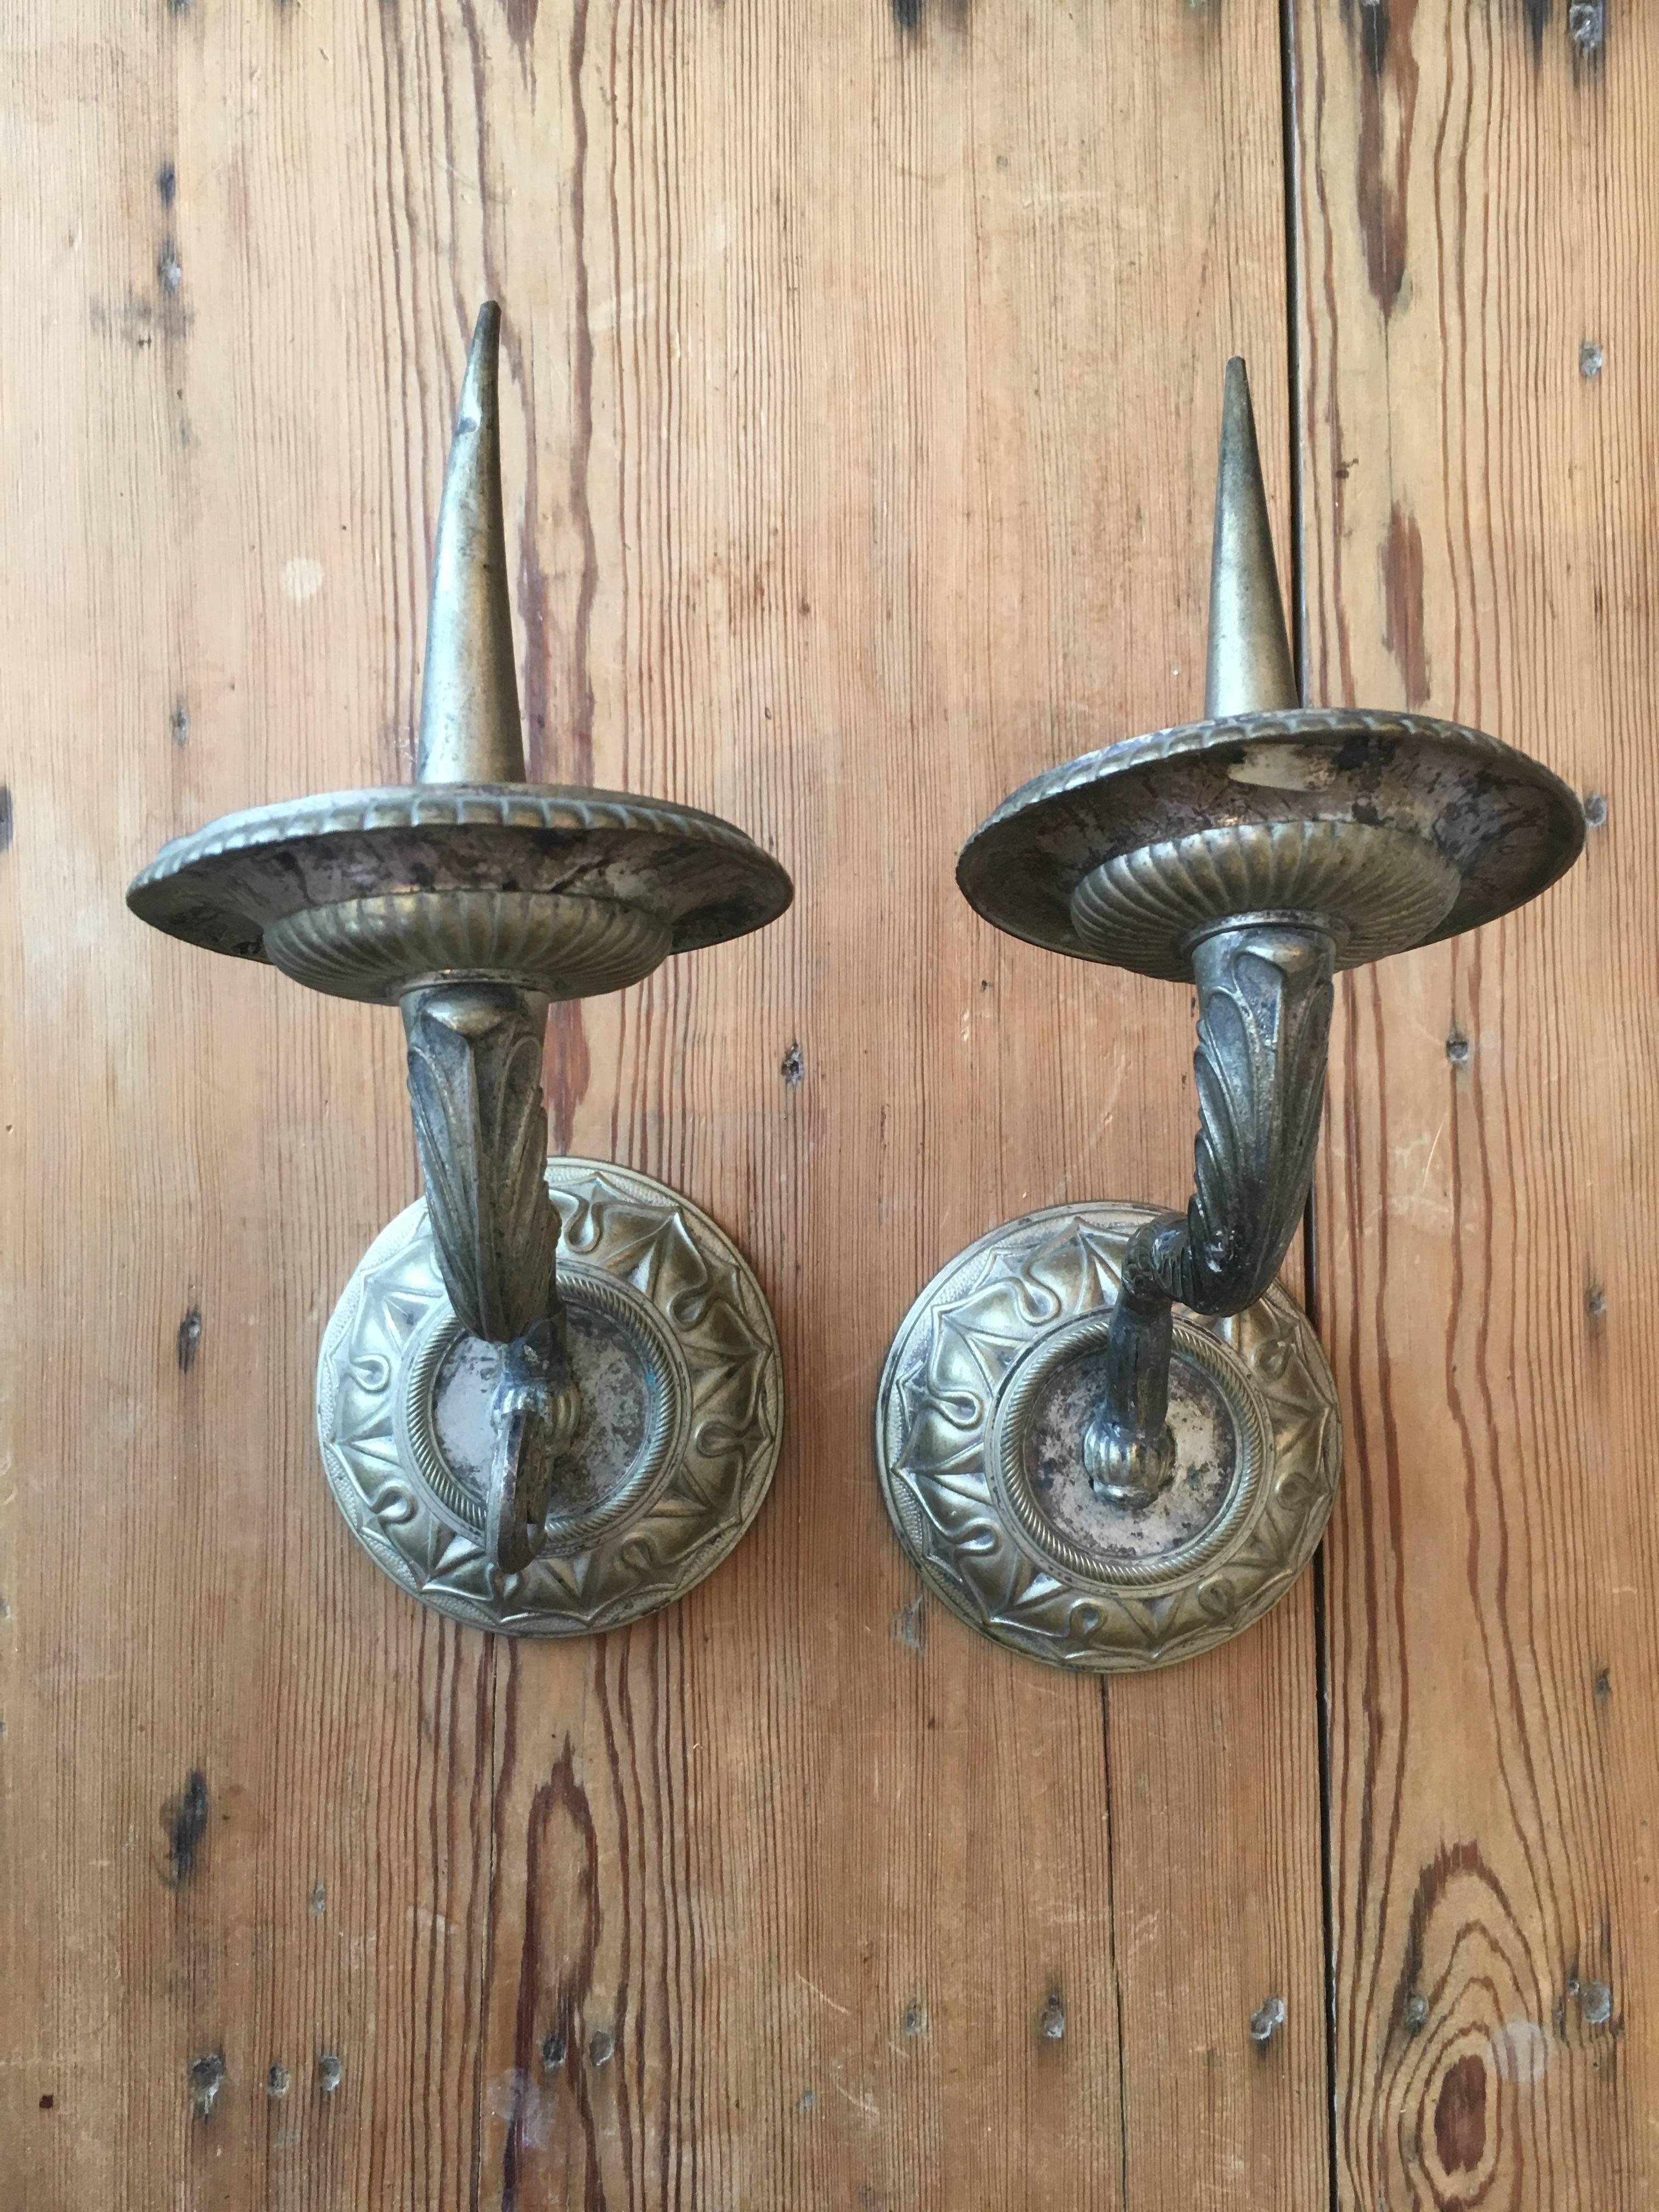 Pair of 19th century Pricket candle sconces.